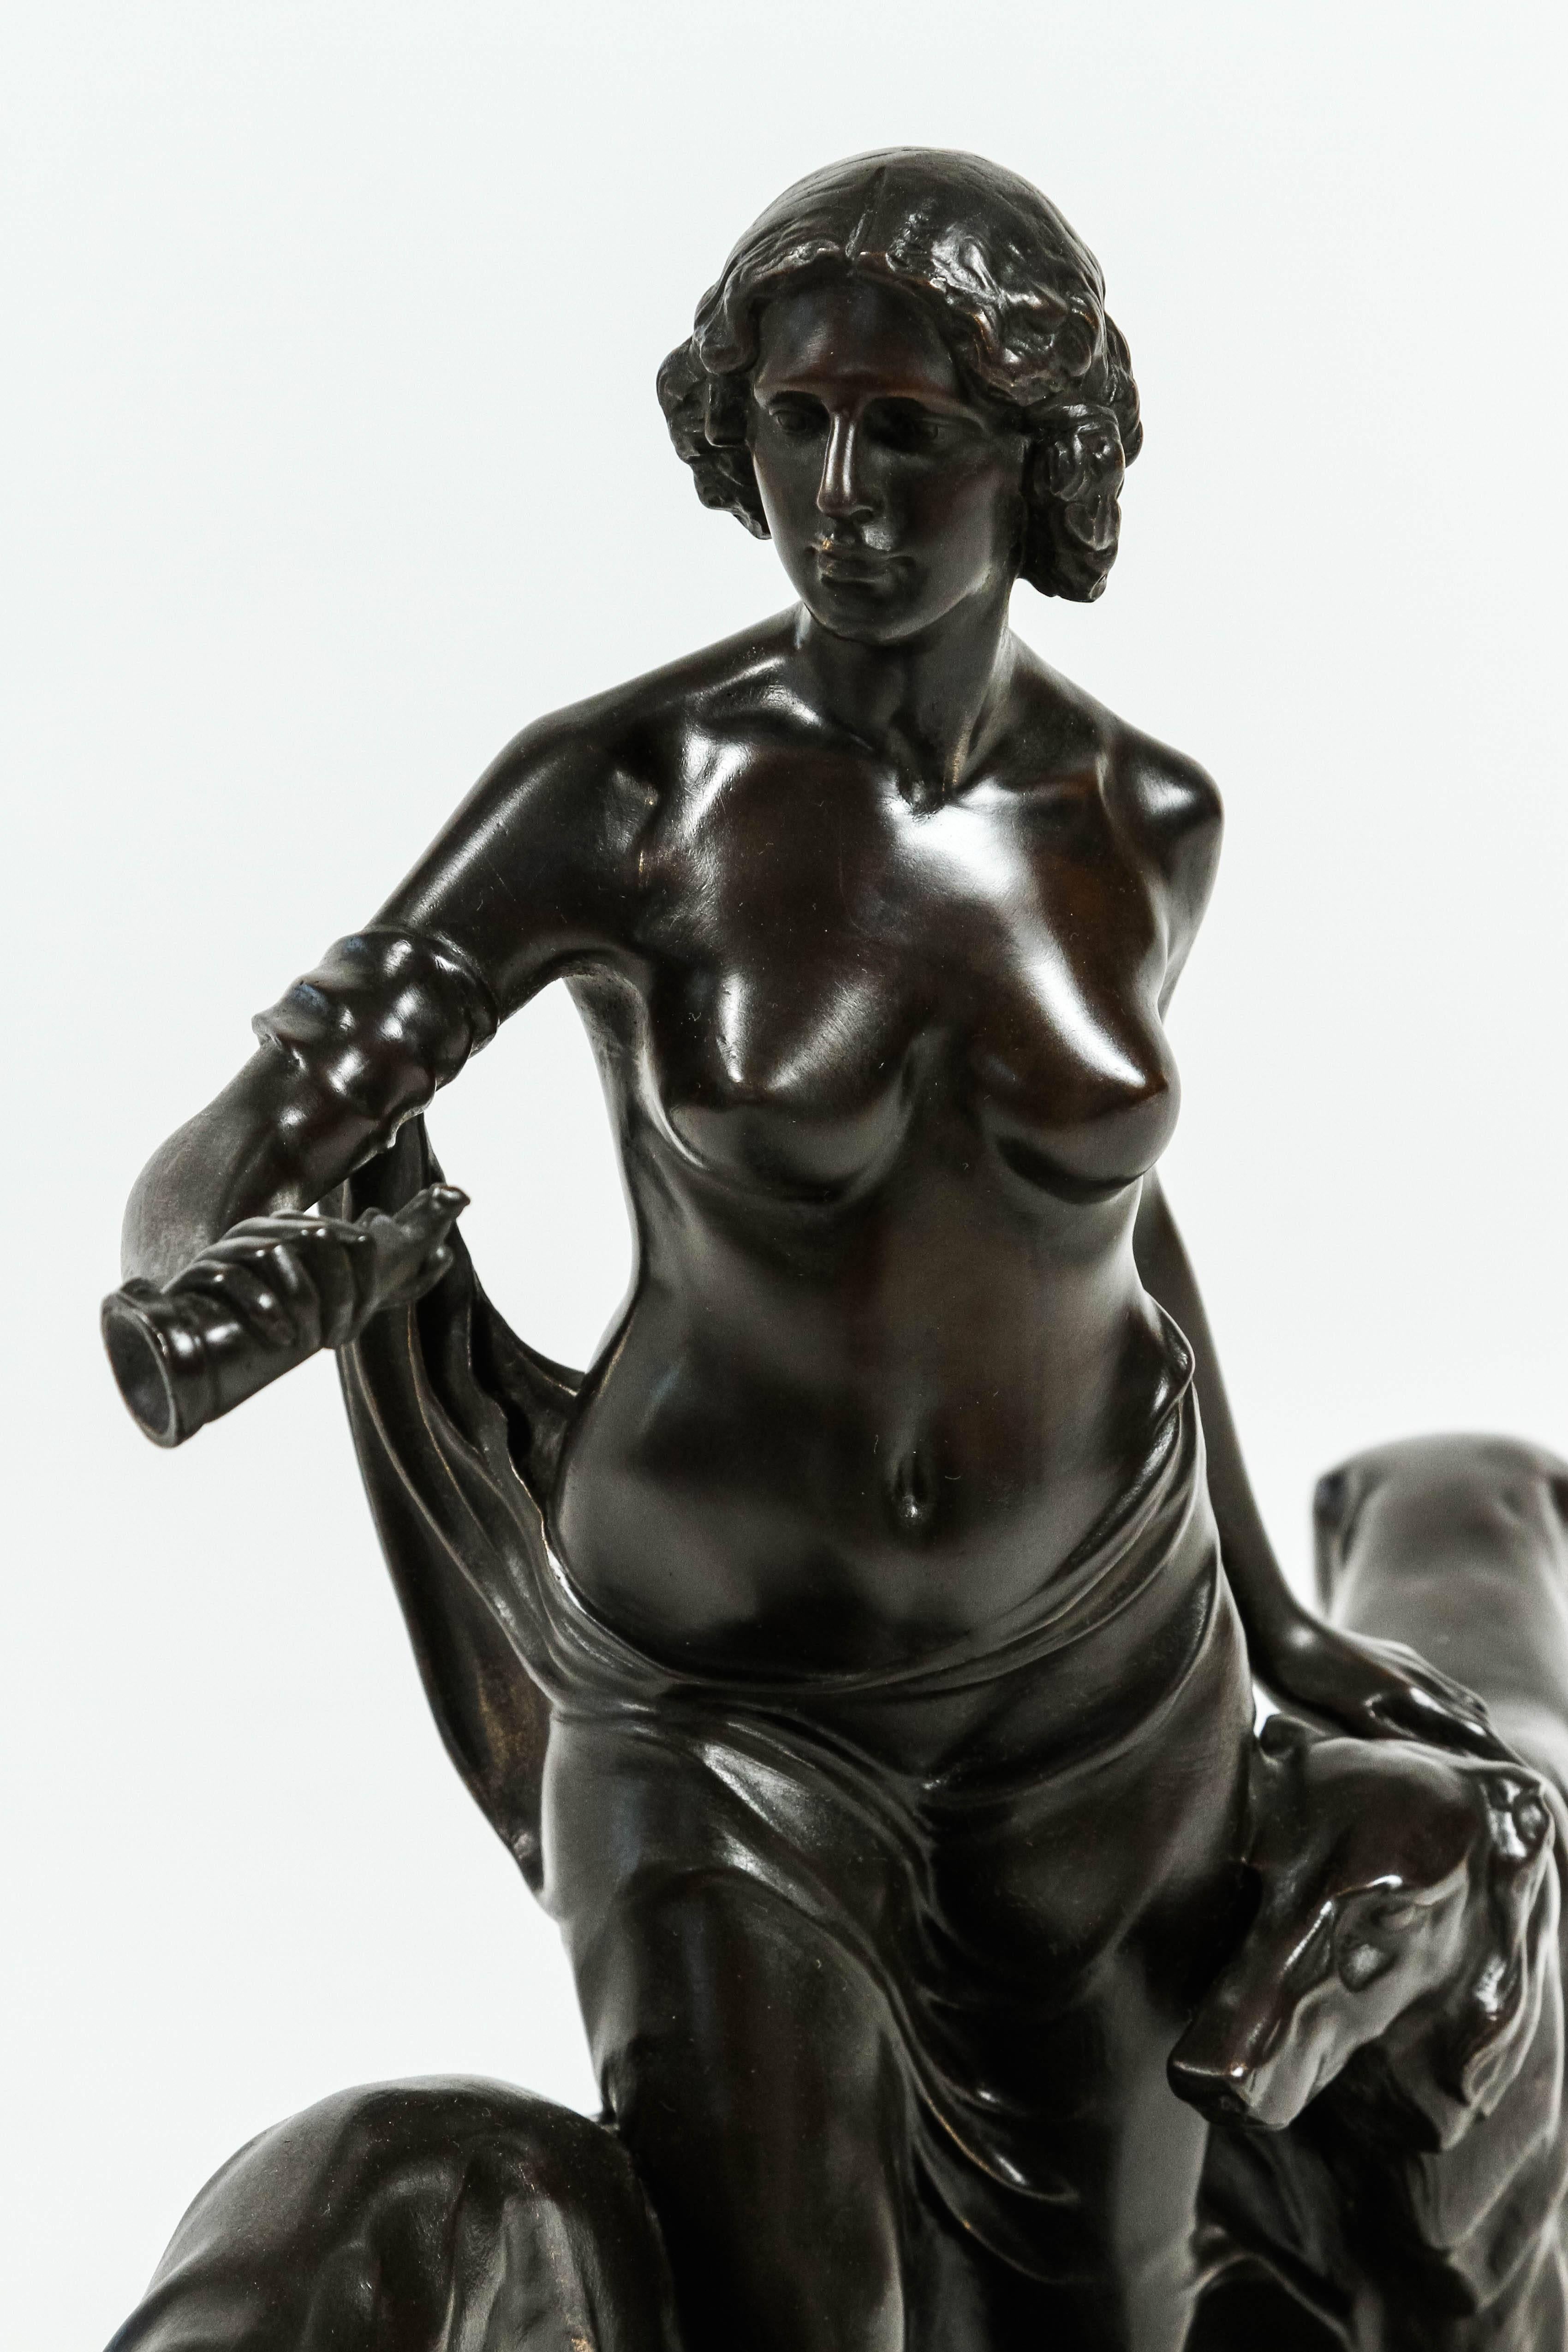 A striking example of the German aesthetic during the Art Deco period. Diana the huntress, horn in hand leading the hounds to the hunt.
A rich almost black patina is in place almost giving the appearance of polished stone. Not much is known about